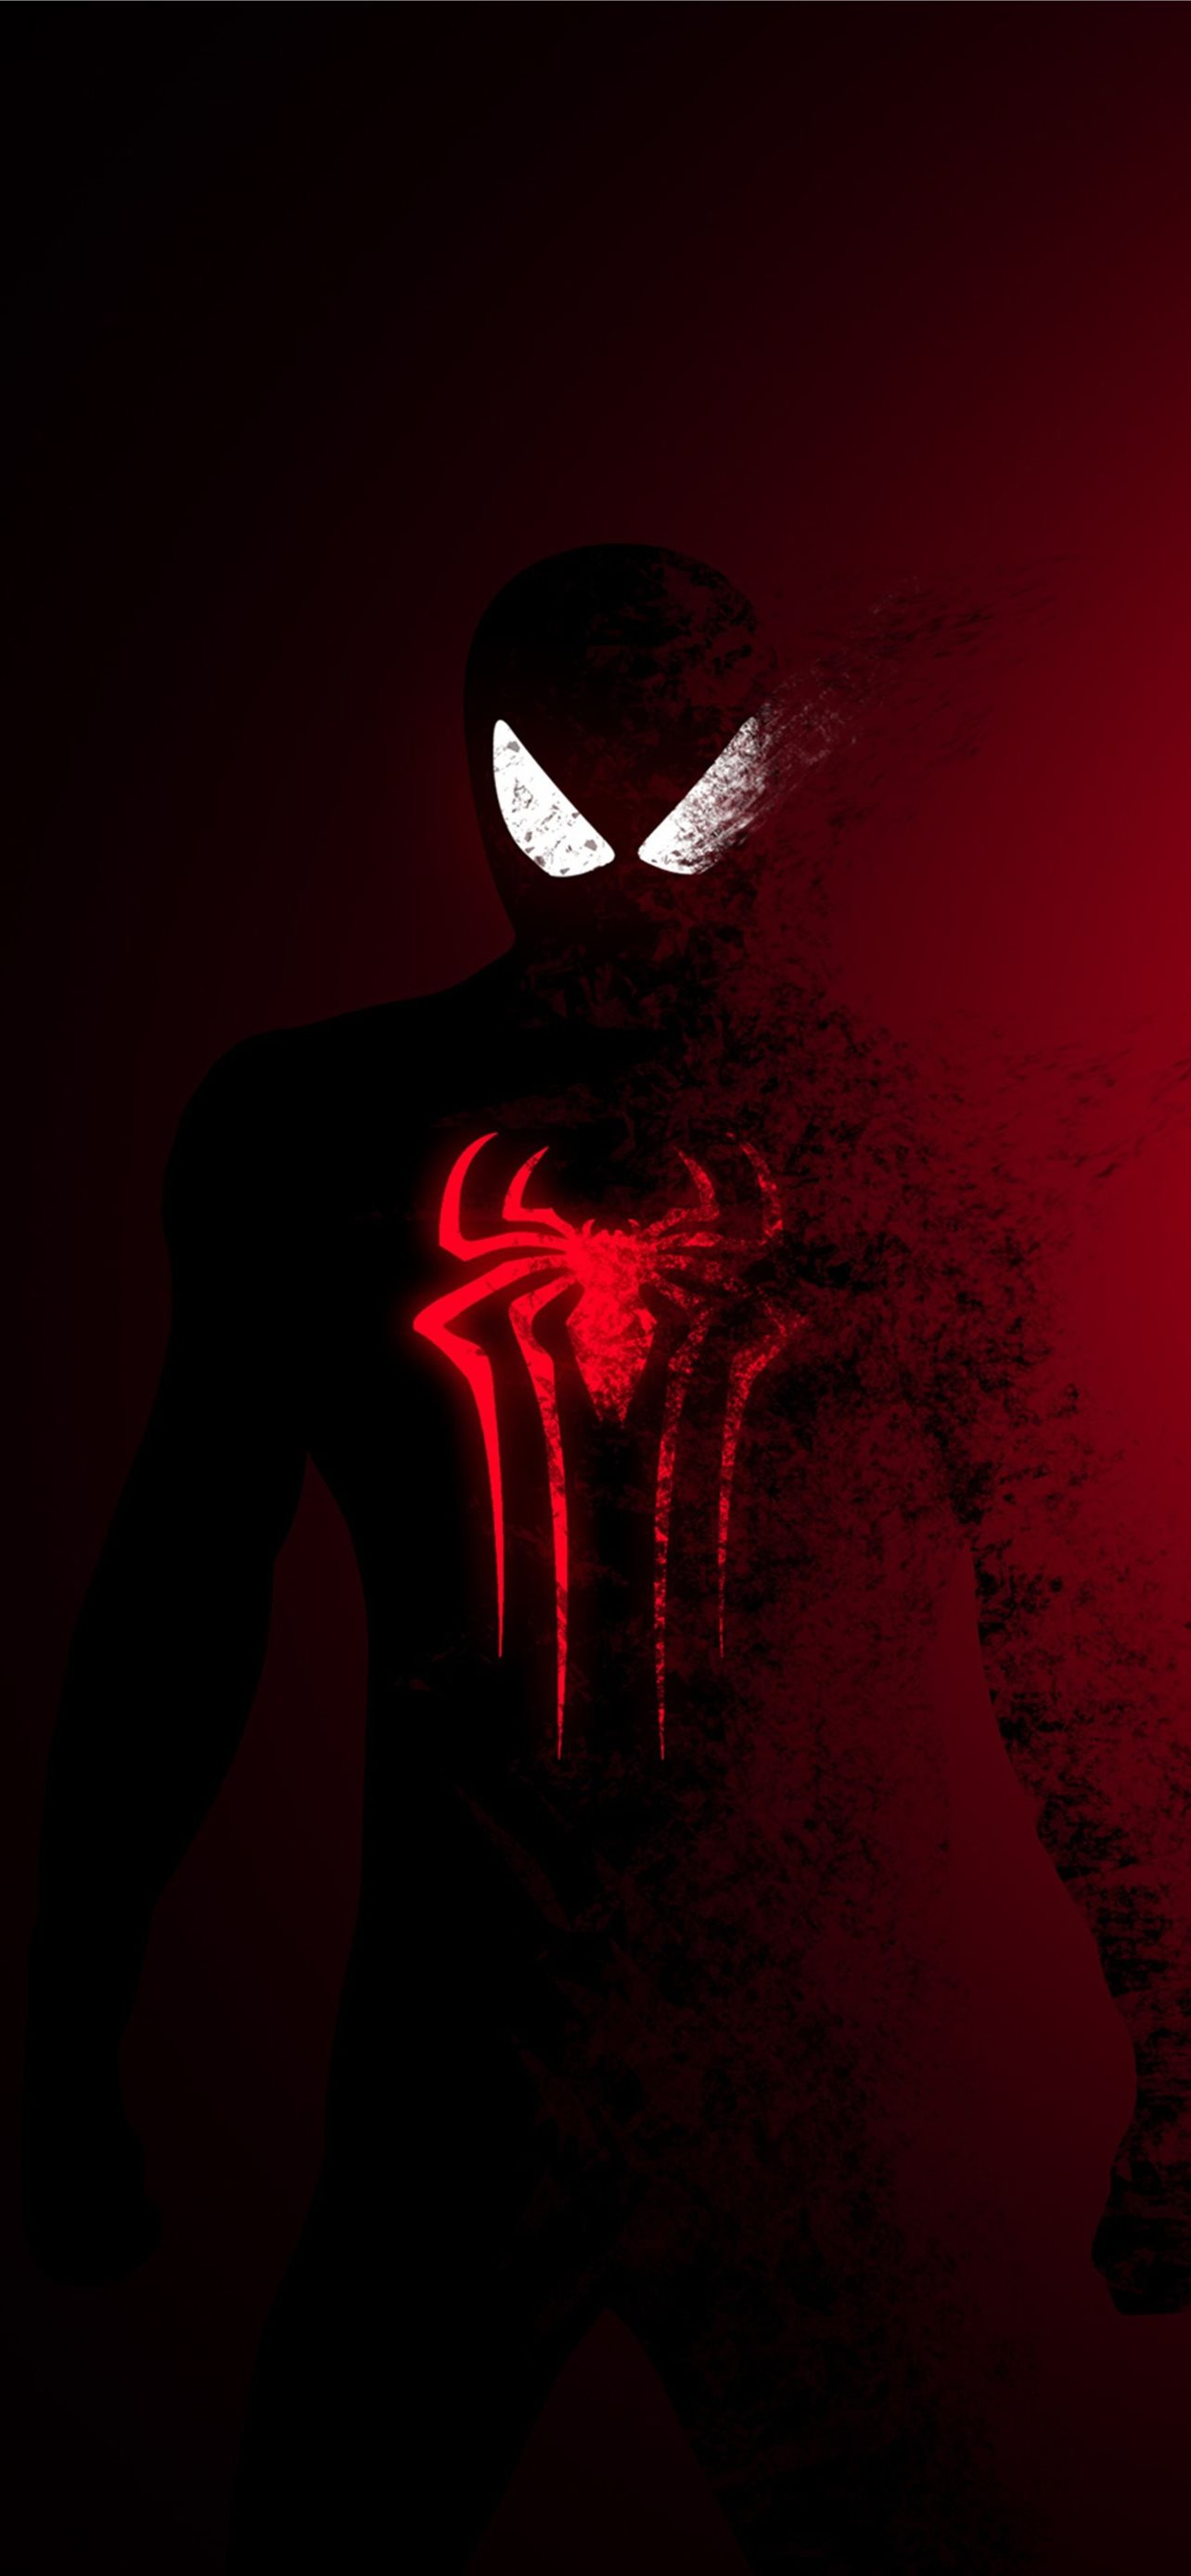 1284x2778 spiderman hd iPhone Wallpapers Free Download